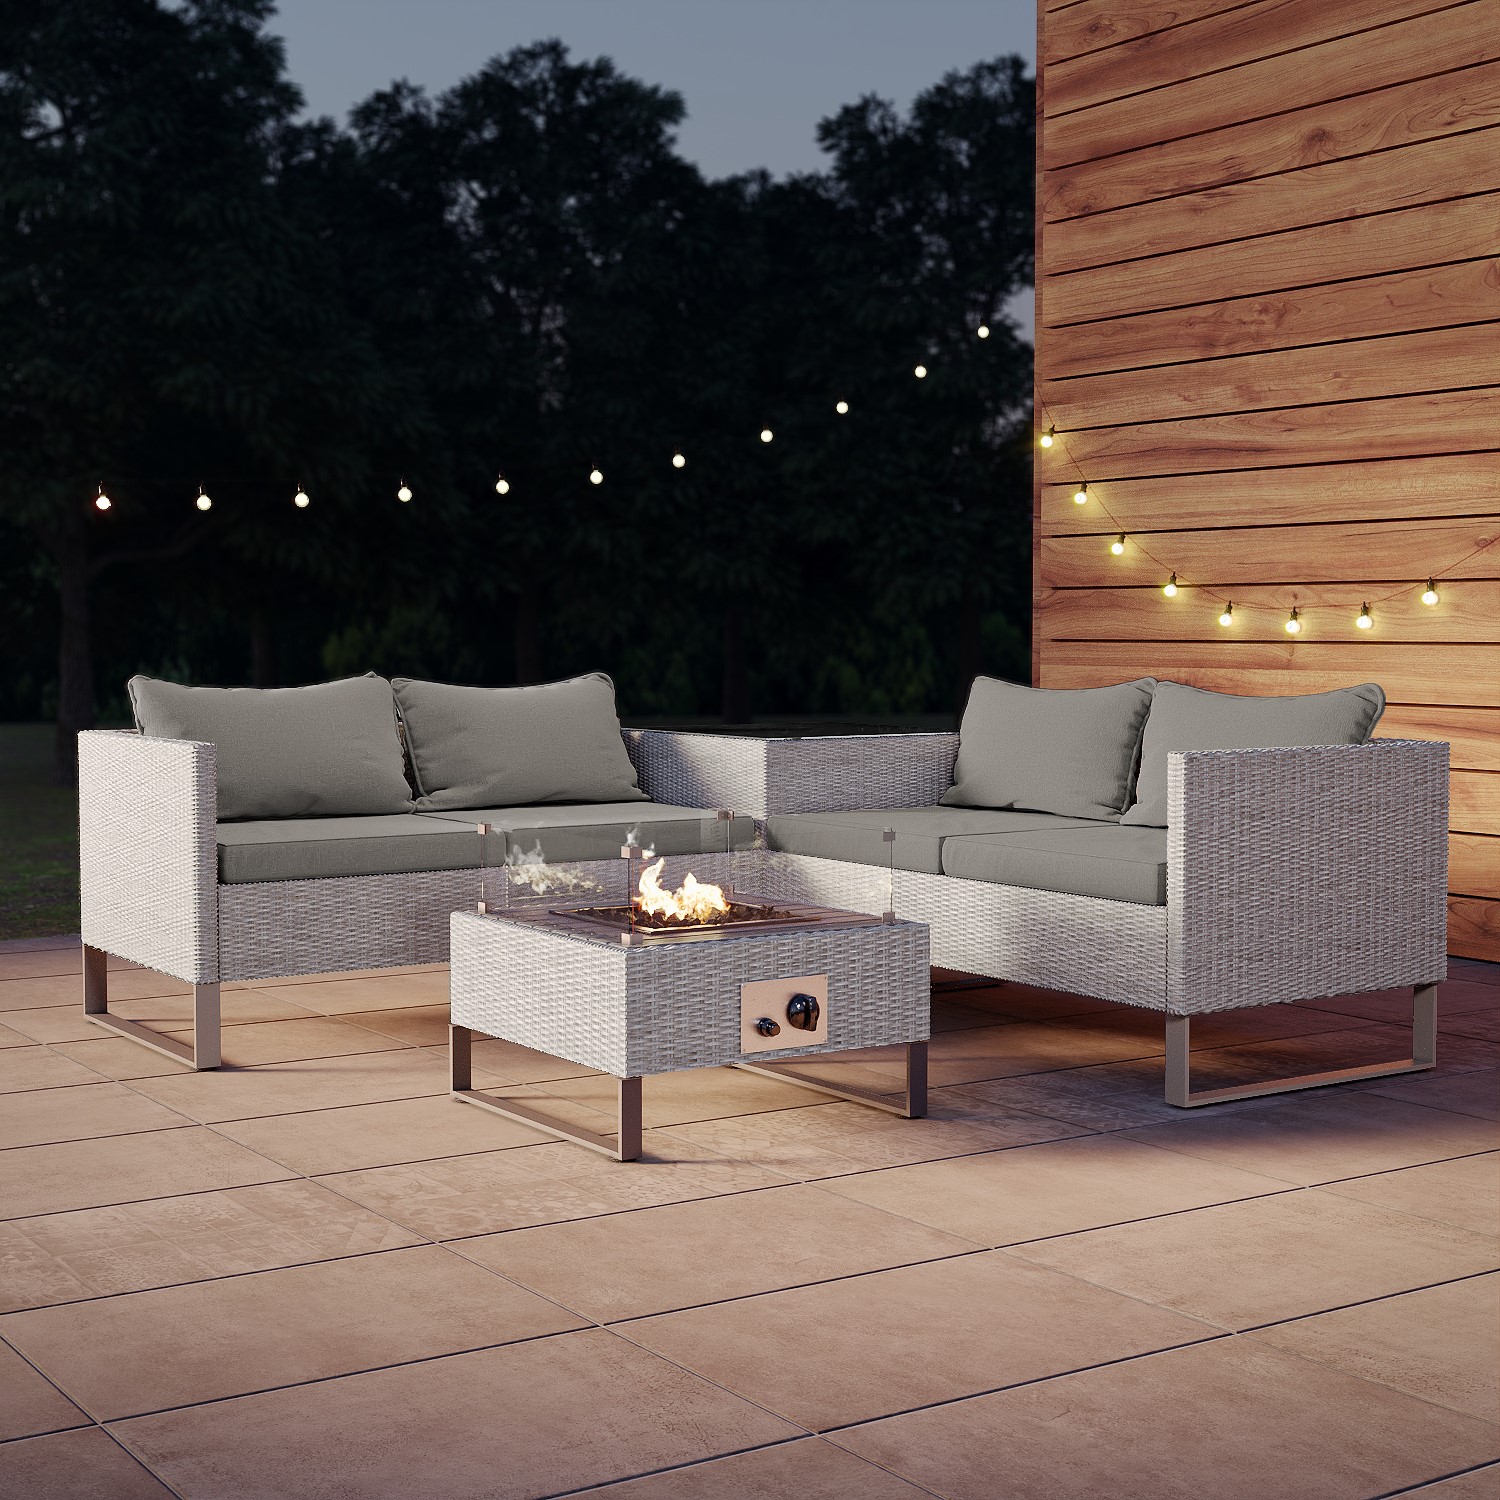 Read more about 4 seater grey rattan garden corner sofa set with storage and fire pit table como